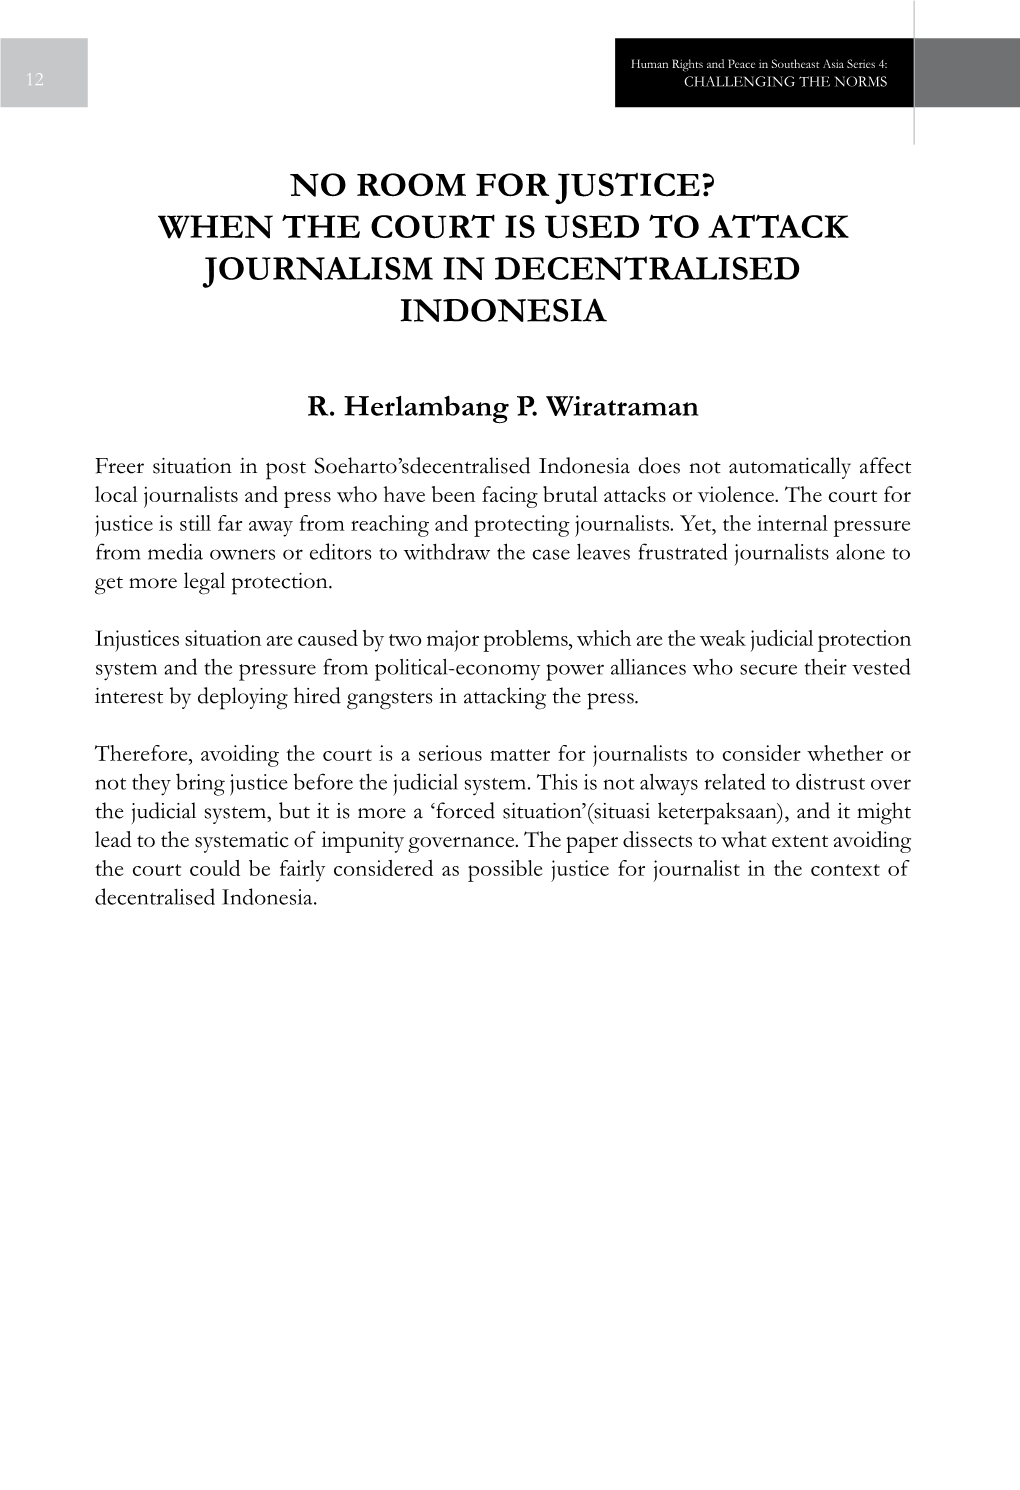 NO ROOM for JUSTICE? When the Court Is Used to Attack Journalism in Decentralised Indonesia